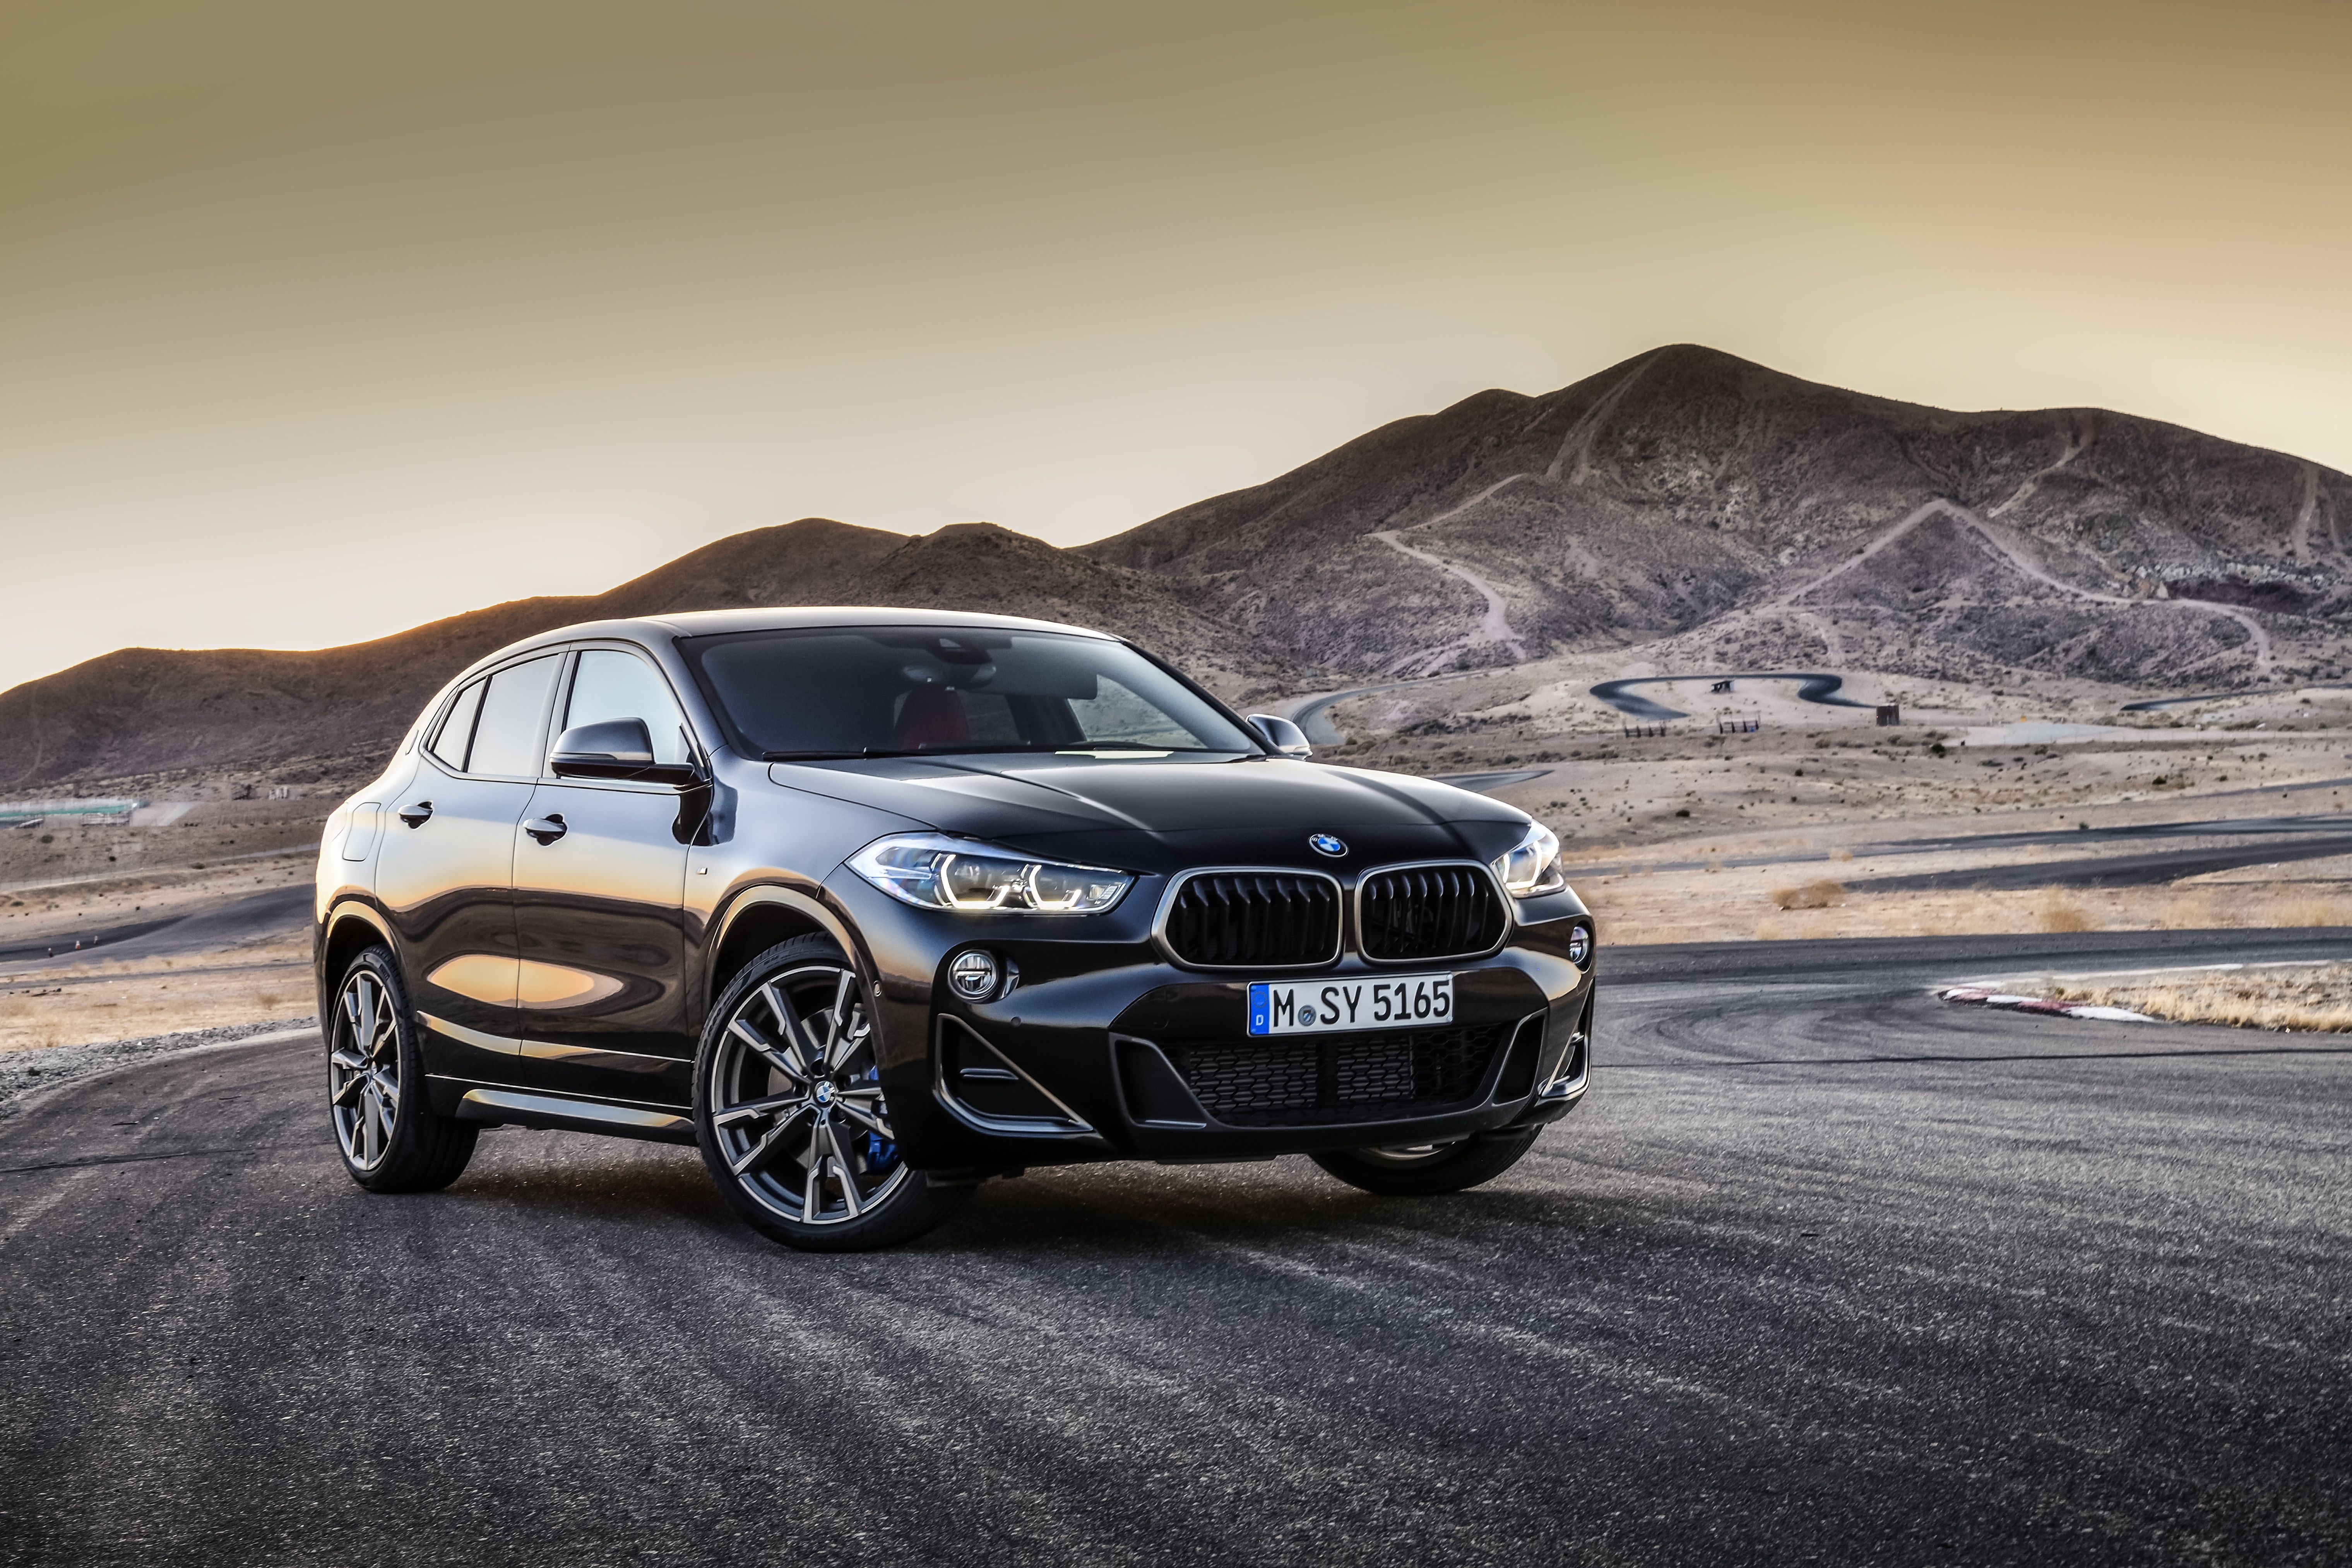 The 2022 BMW X2 parked on the road in nature.